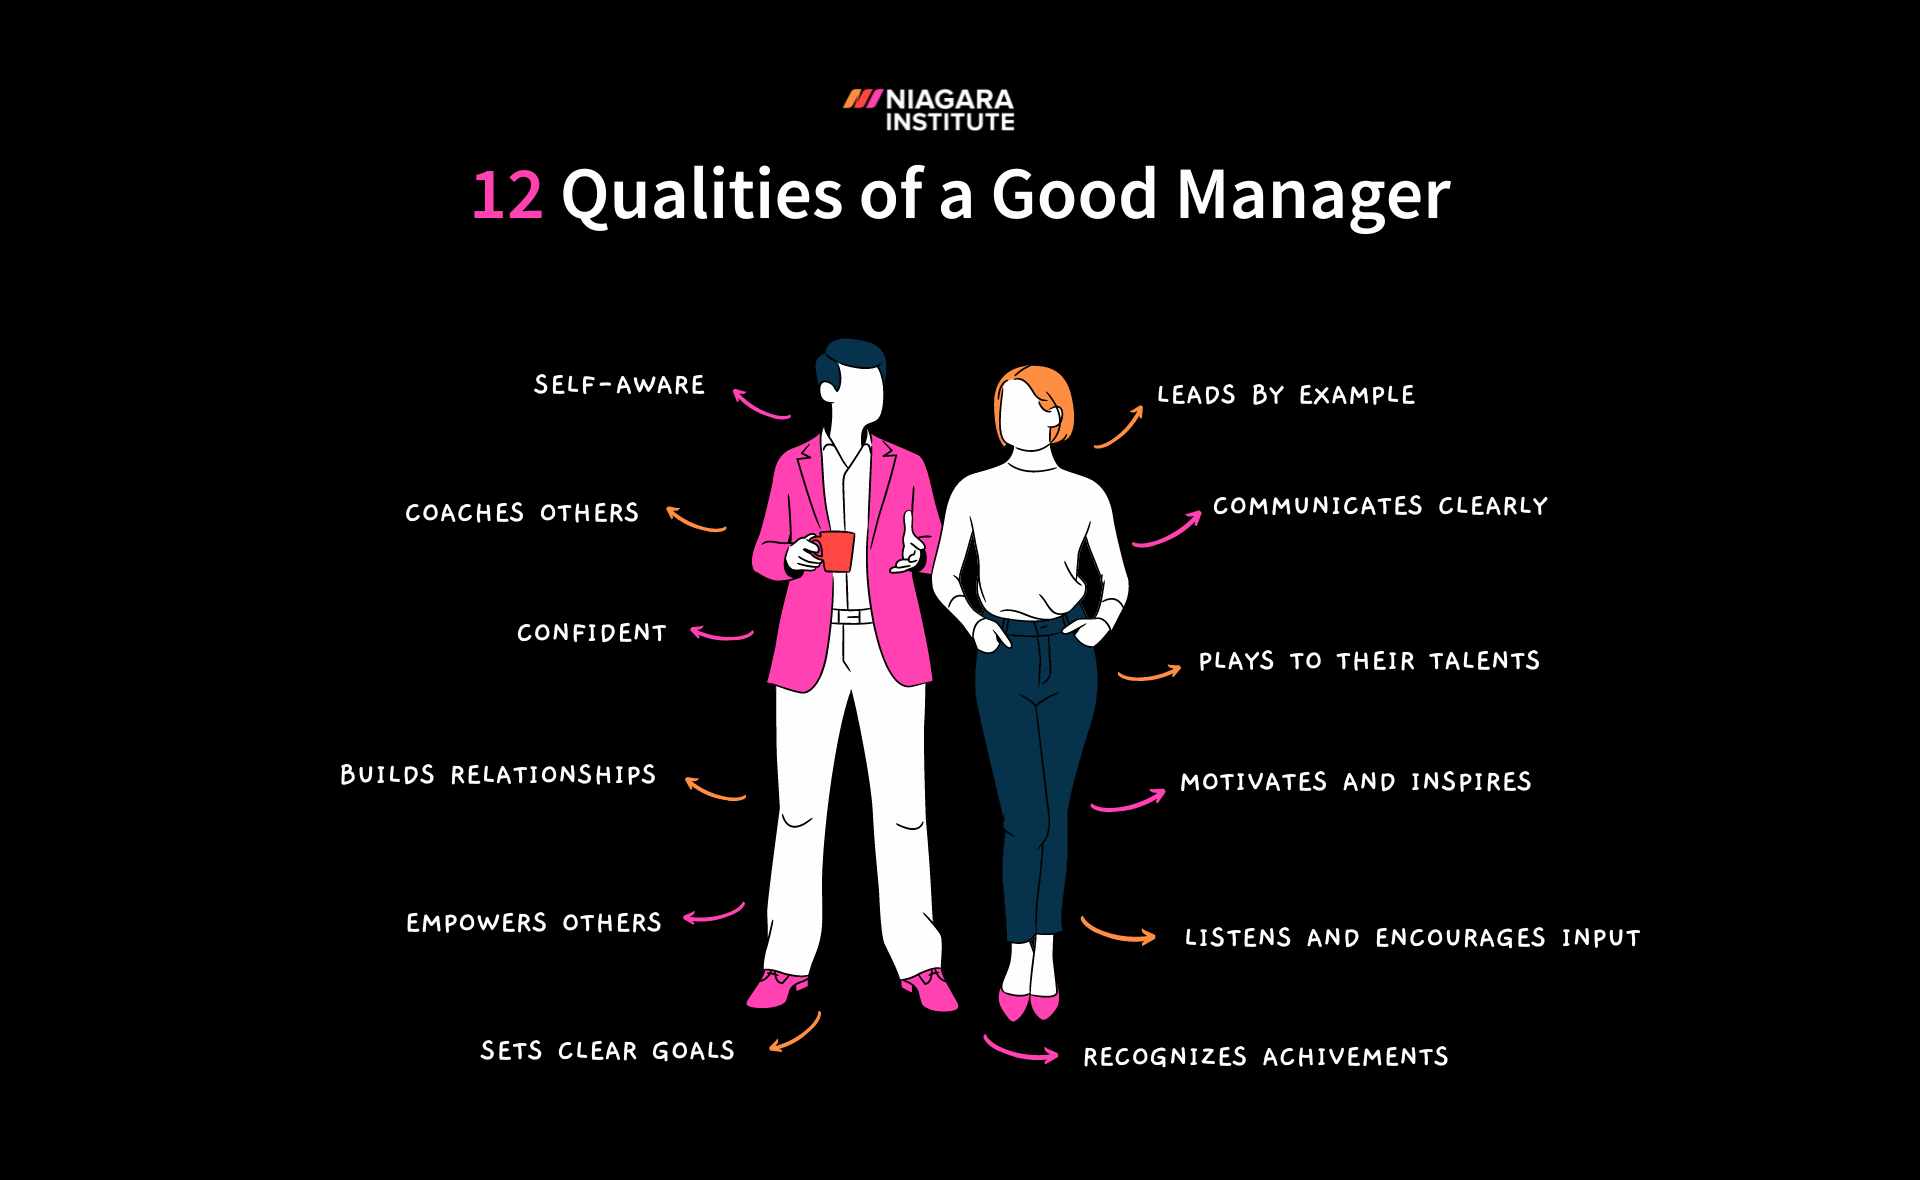 12 Qualities of a Good Manager